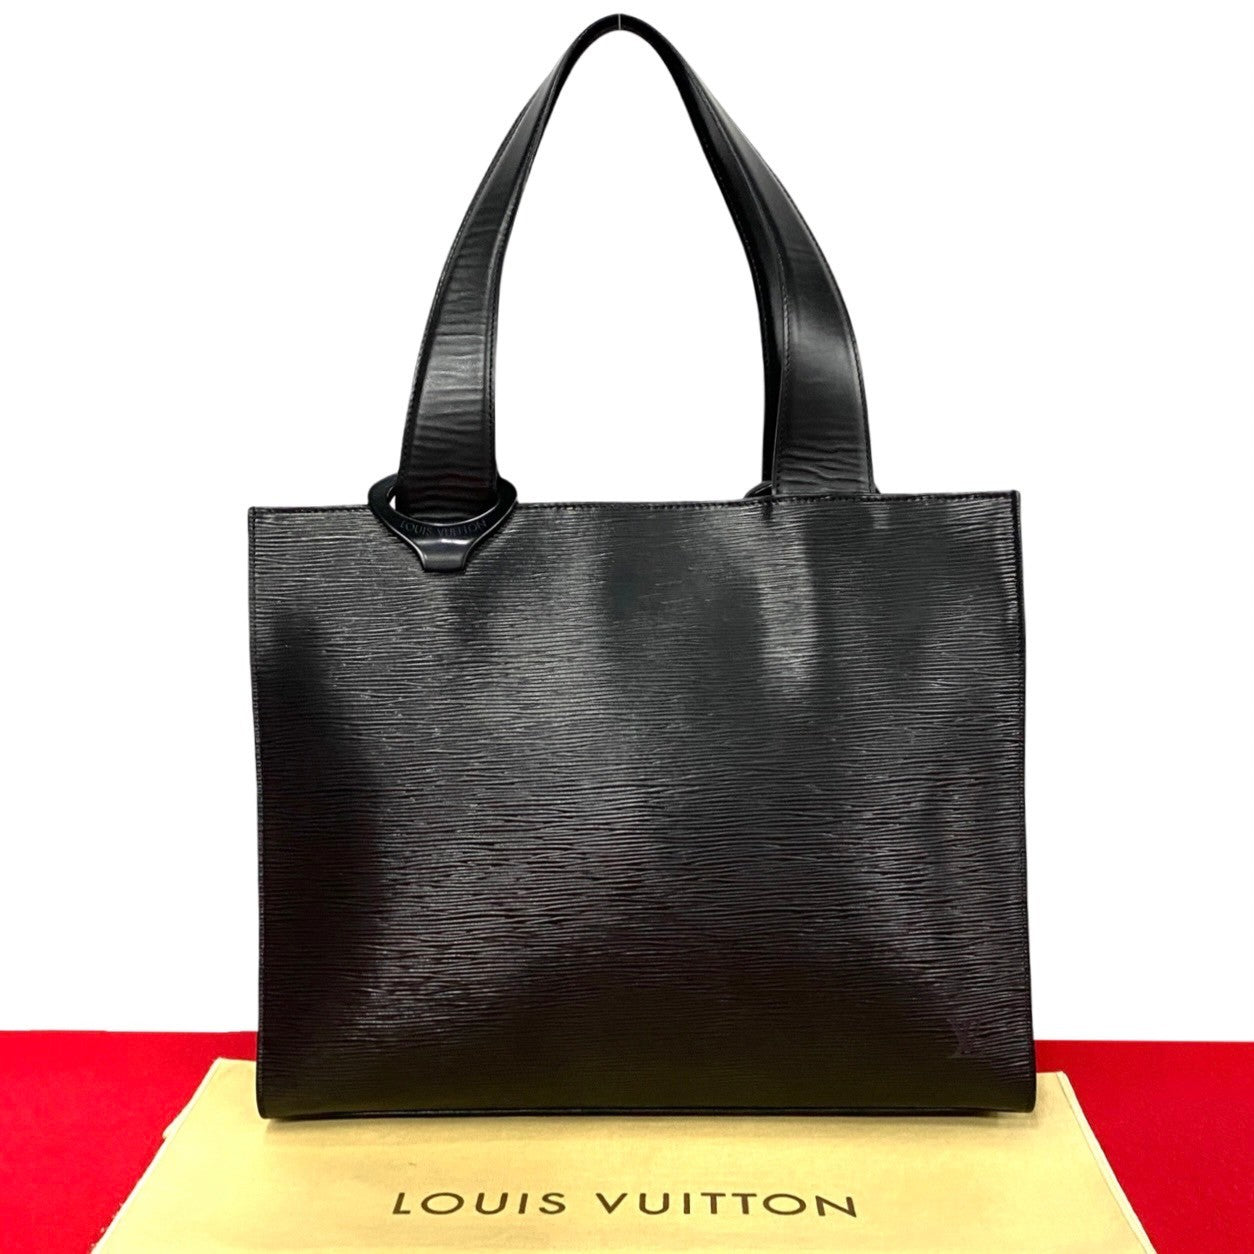 Louis Vuitton Epi Gemo Tote Bag Leather Tote Bag M52452 in Excellent condition